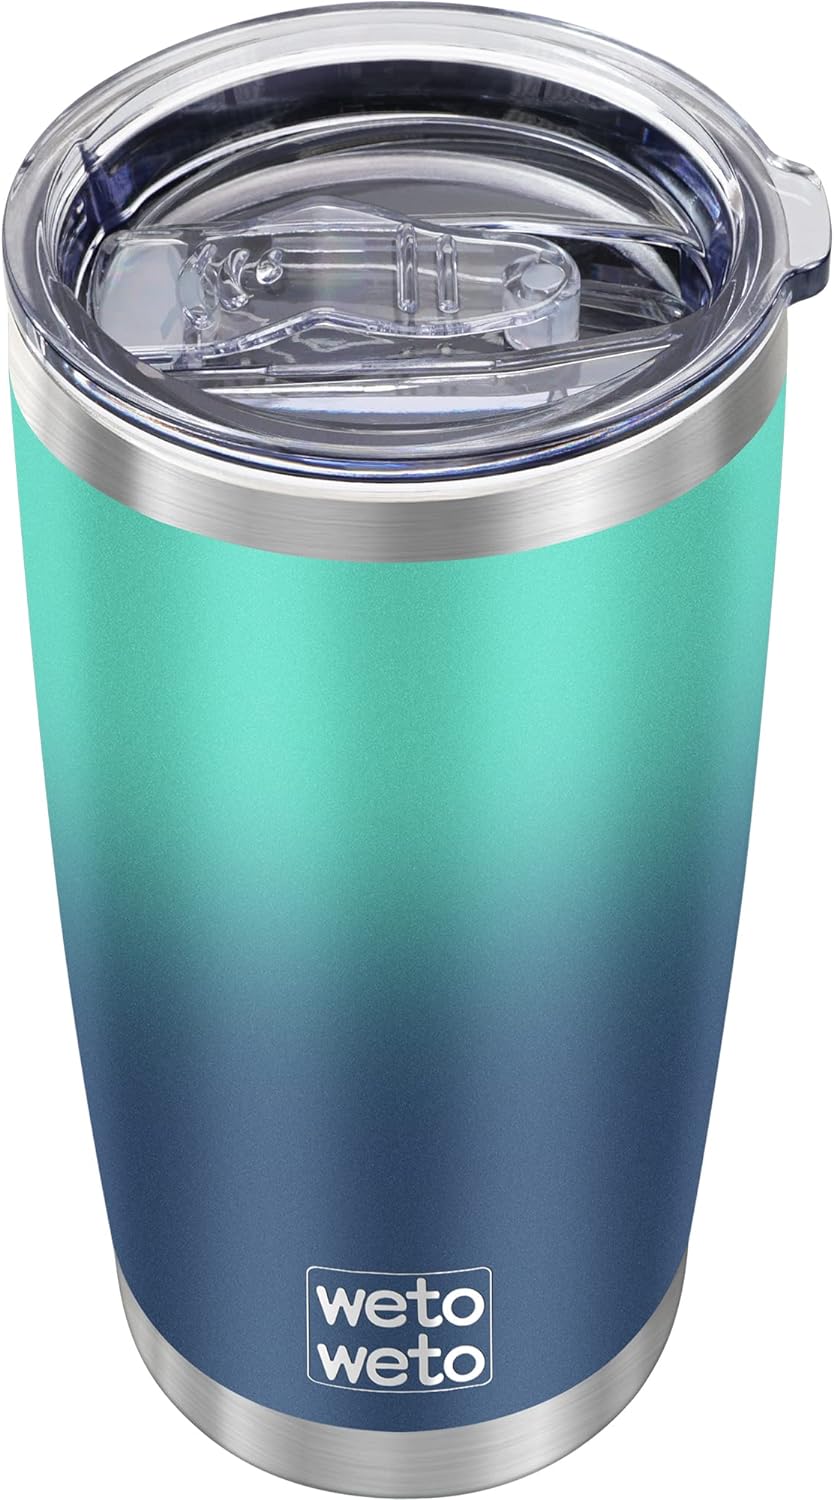 WETOWETO 20oz Tumbler, Stainless Steel Vacuum Insulated Coffee Travel Mug, Double Wall Powder Coated Insulated Coffee Mug Travel Mug with Lid Thermal Cup for Outdoor (Navy Blue, 1 Pack)